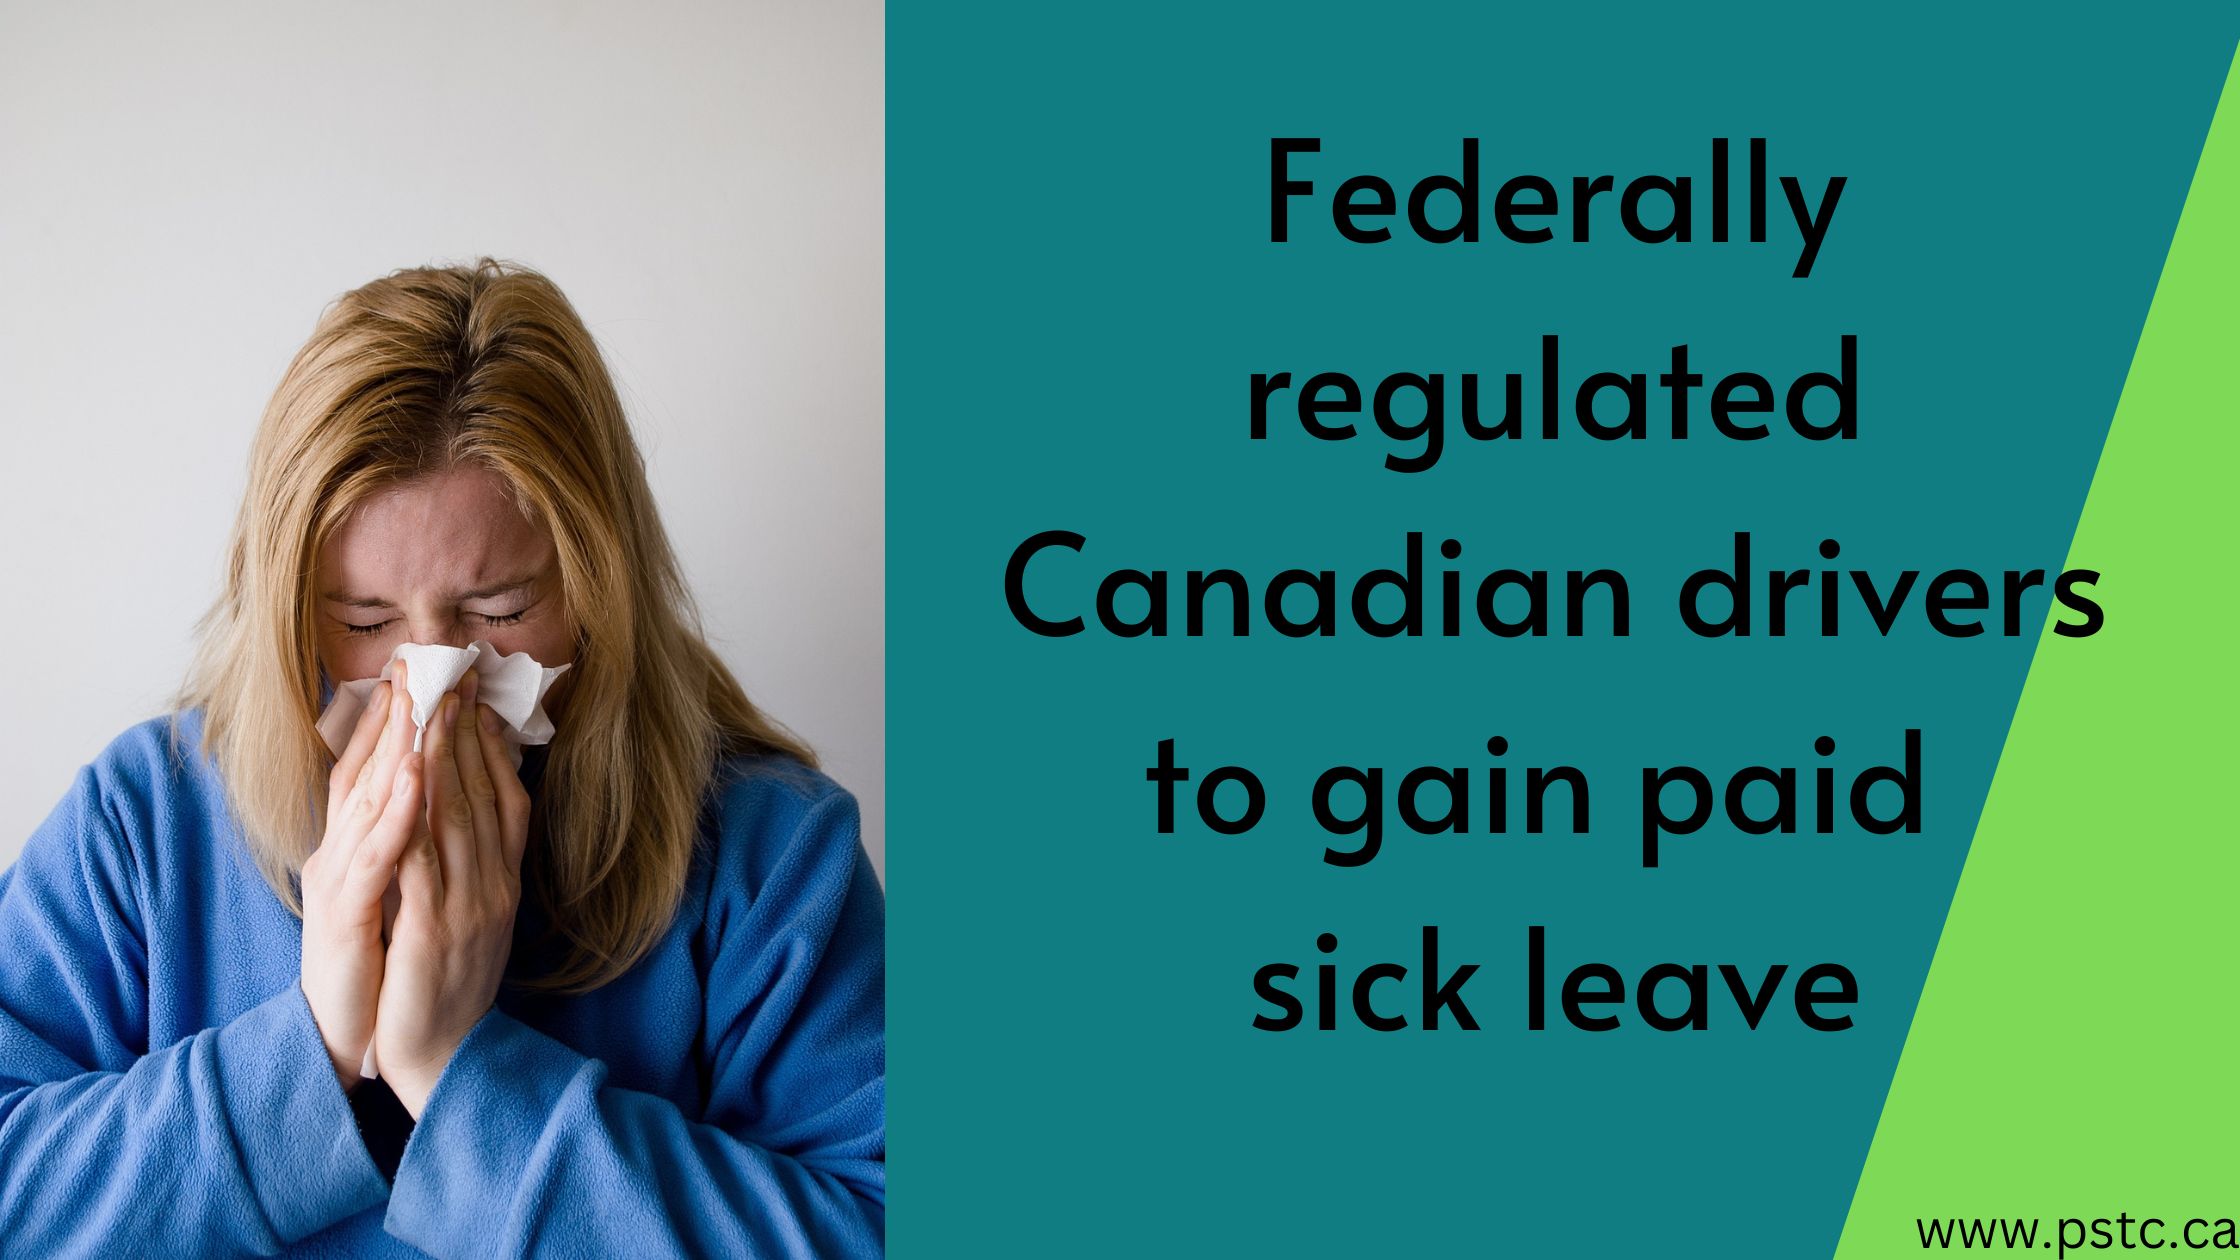 Federally regulated Canadian drivers to gain paid sick leave